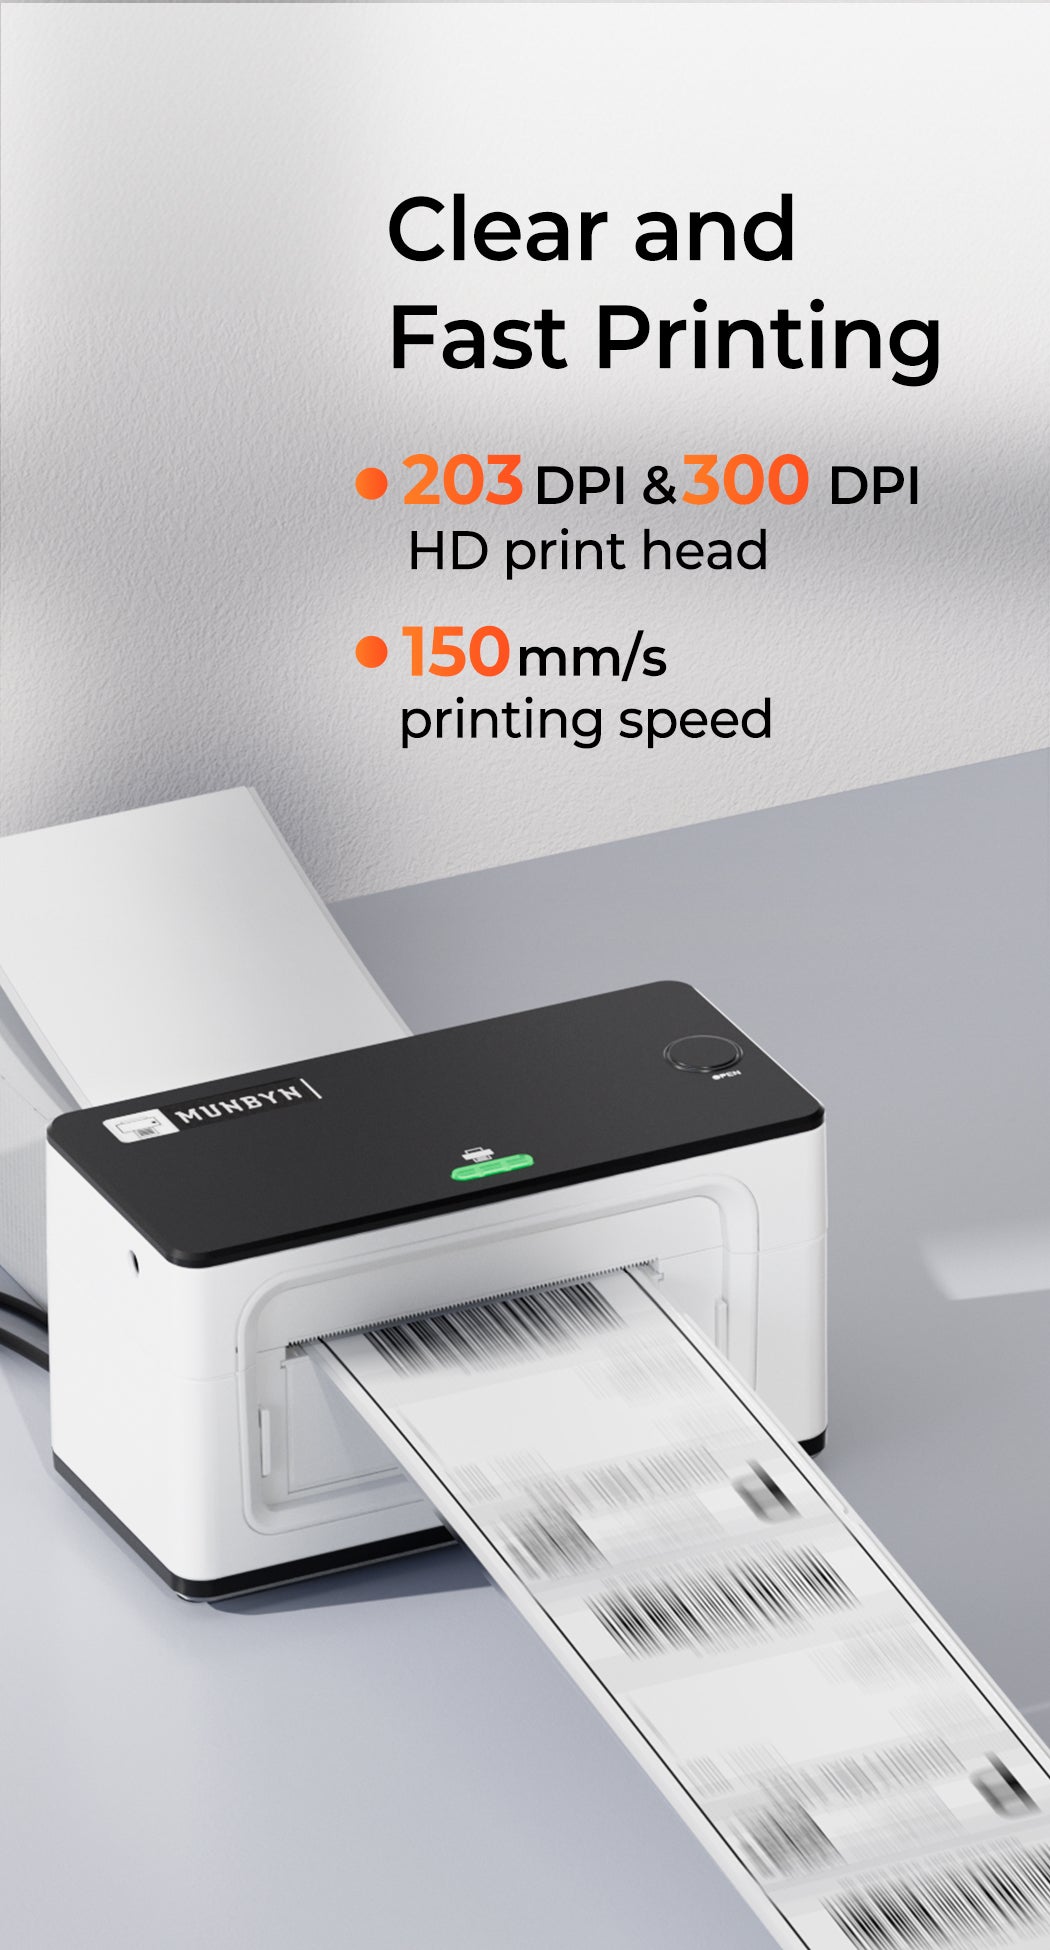 Munbyn P941 shipping label printer is printing shipping labels.